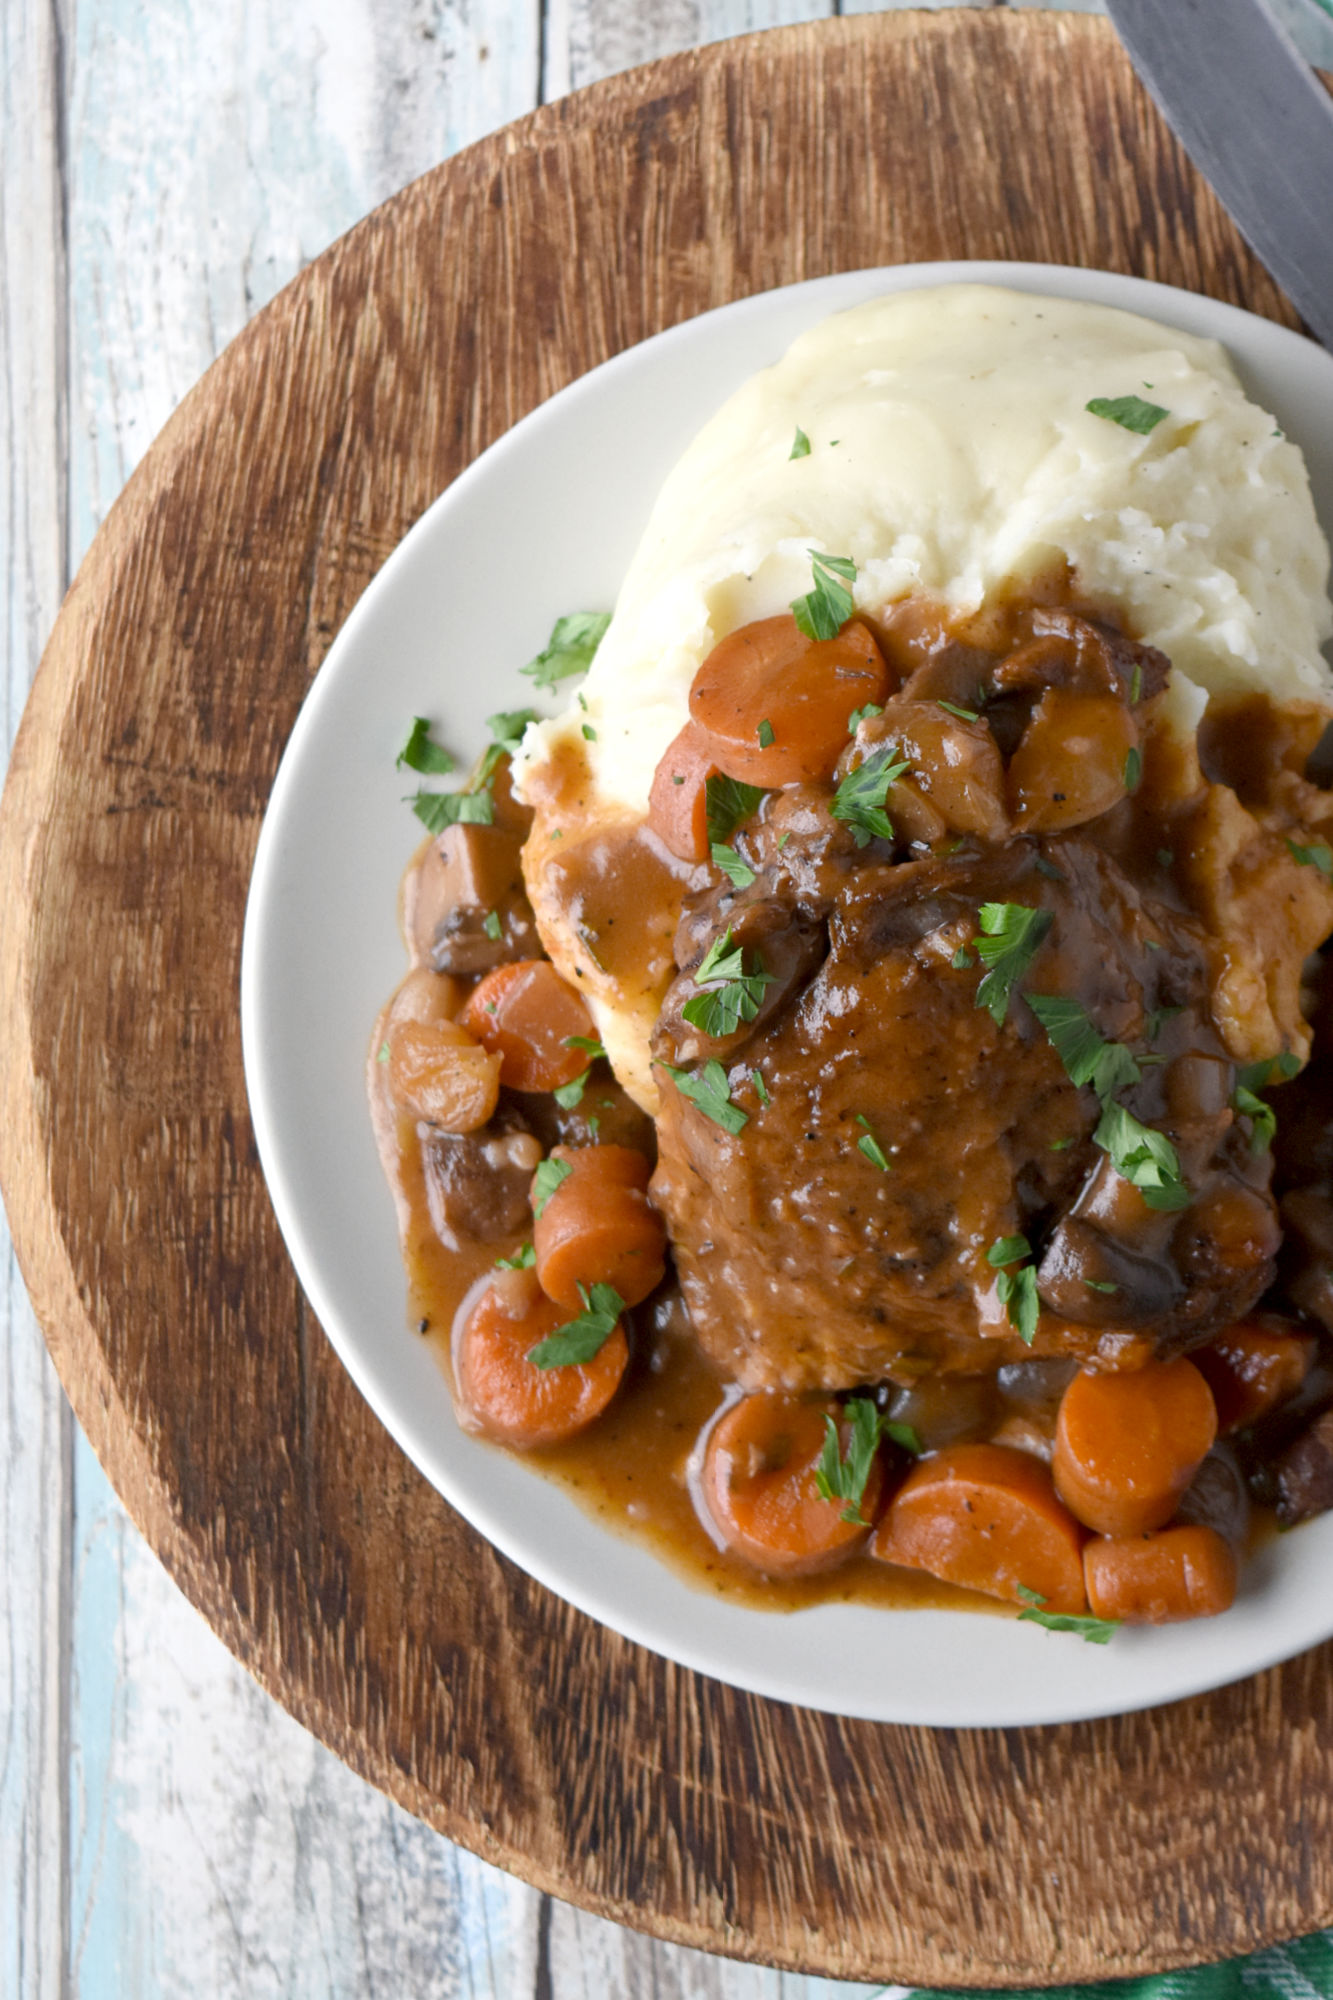 Classic Coq au Vin has all the rich flavors of the vintage recipe but easy enough for a weeknight dinner. With a little prep work, this is on the table in under 45 minutes. #OurFamilyTable #coqauvin #comfortfood #Frenchrecipe #chickenrecipe #classicrecipe #rustic